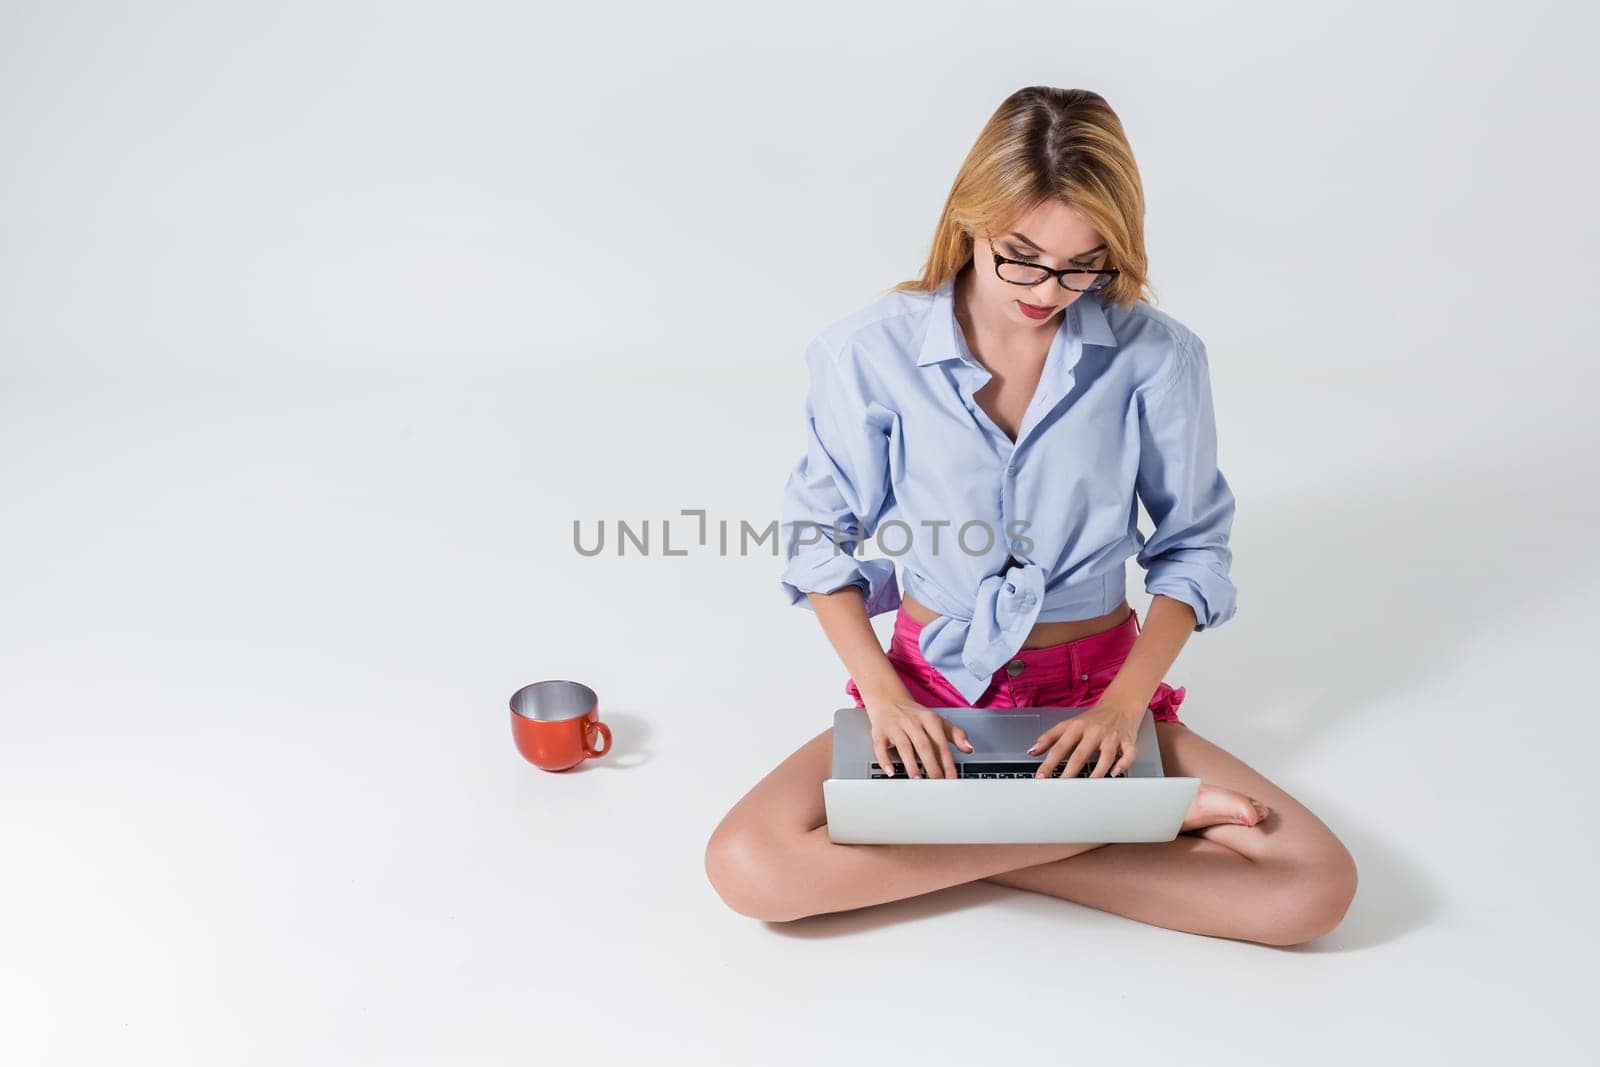 young woman sitting on the floor with crossed legs and using laptop on white background. typing on keyboard and looking at monitor